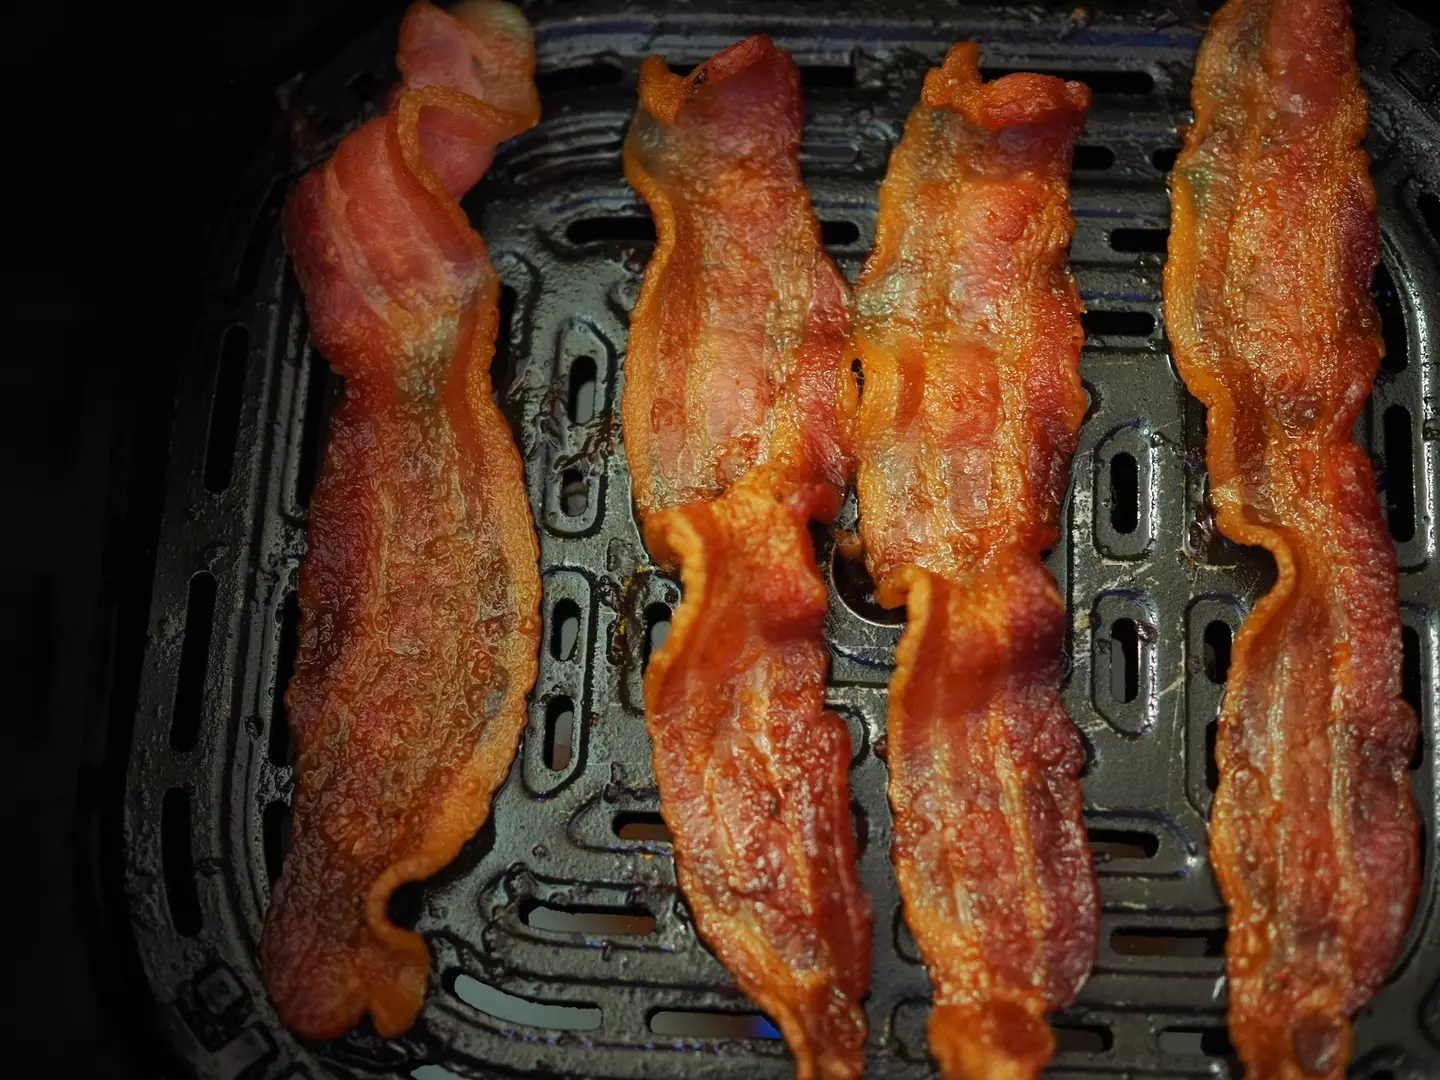 There's a risk bacon will cook unevenly. (cj white / Getty Images)